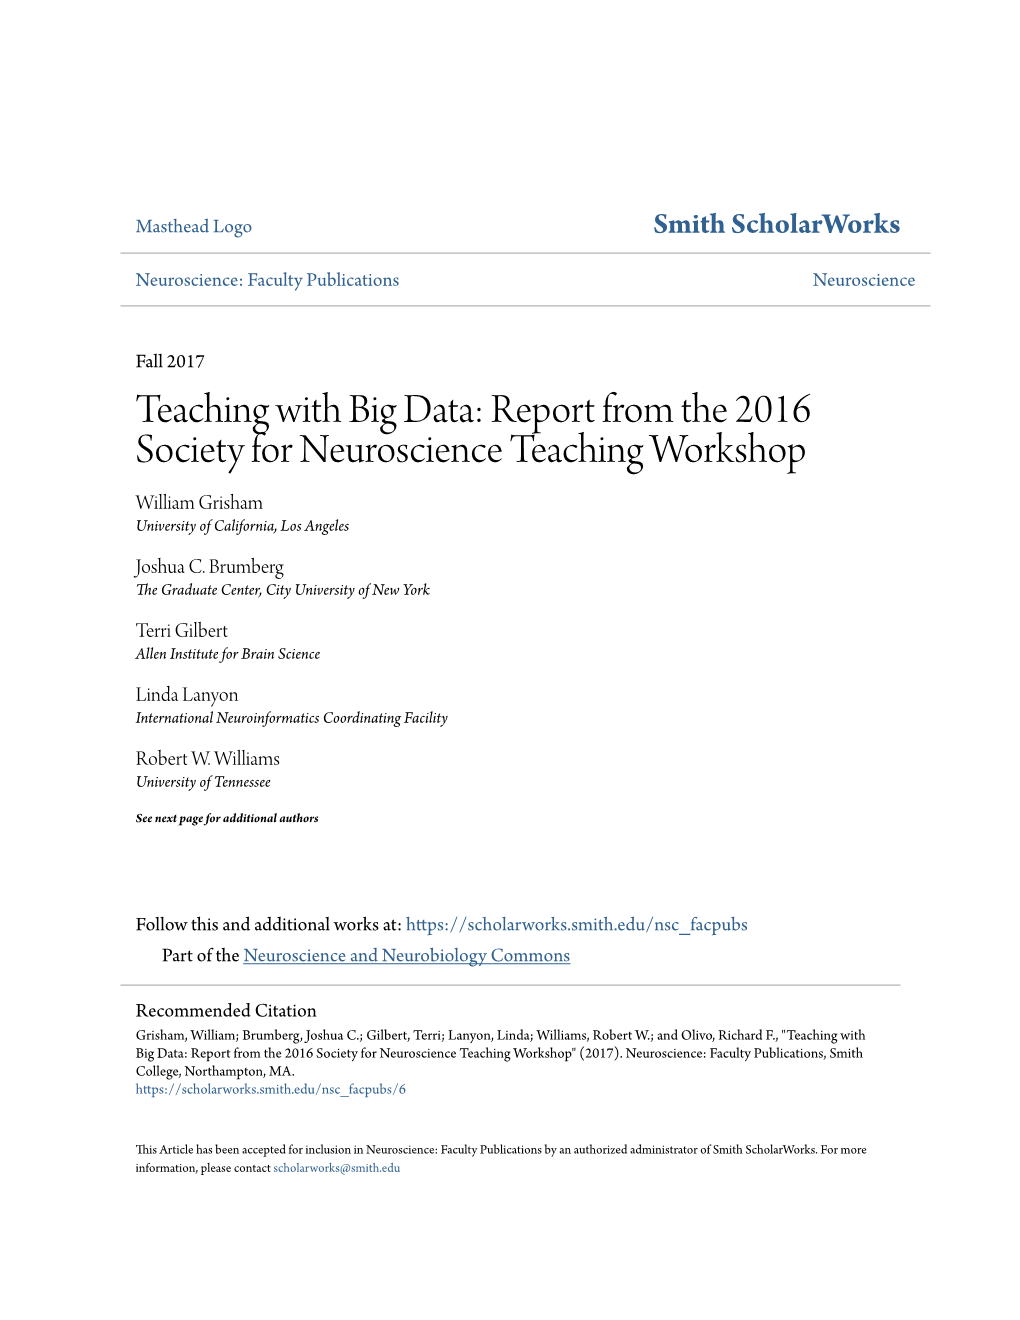 Report from the 2016 Society for Neuroscience Teaching Workshop William Grisham University of California, Los Angeles